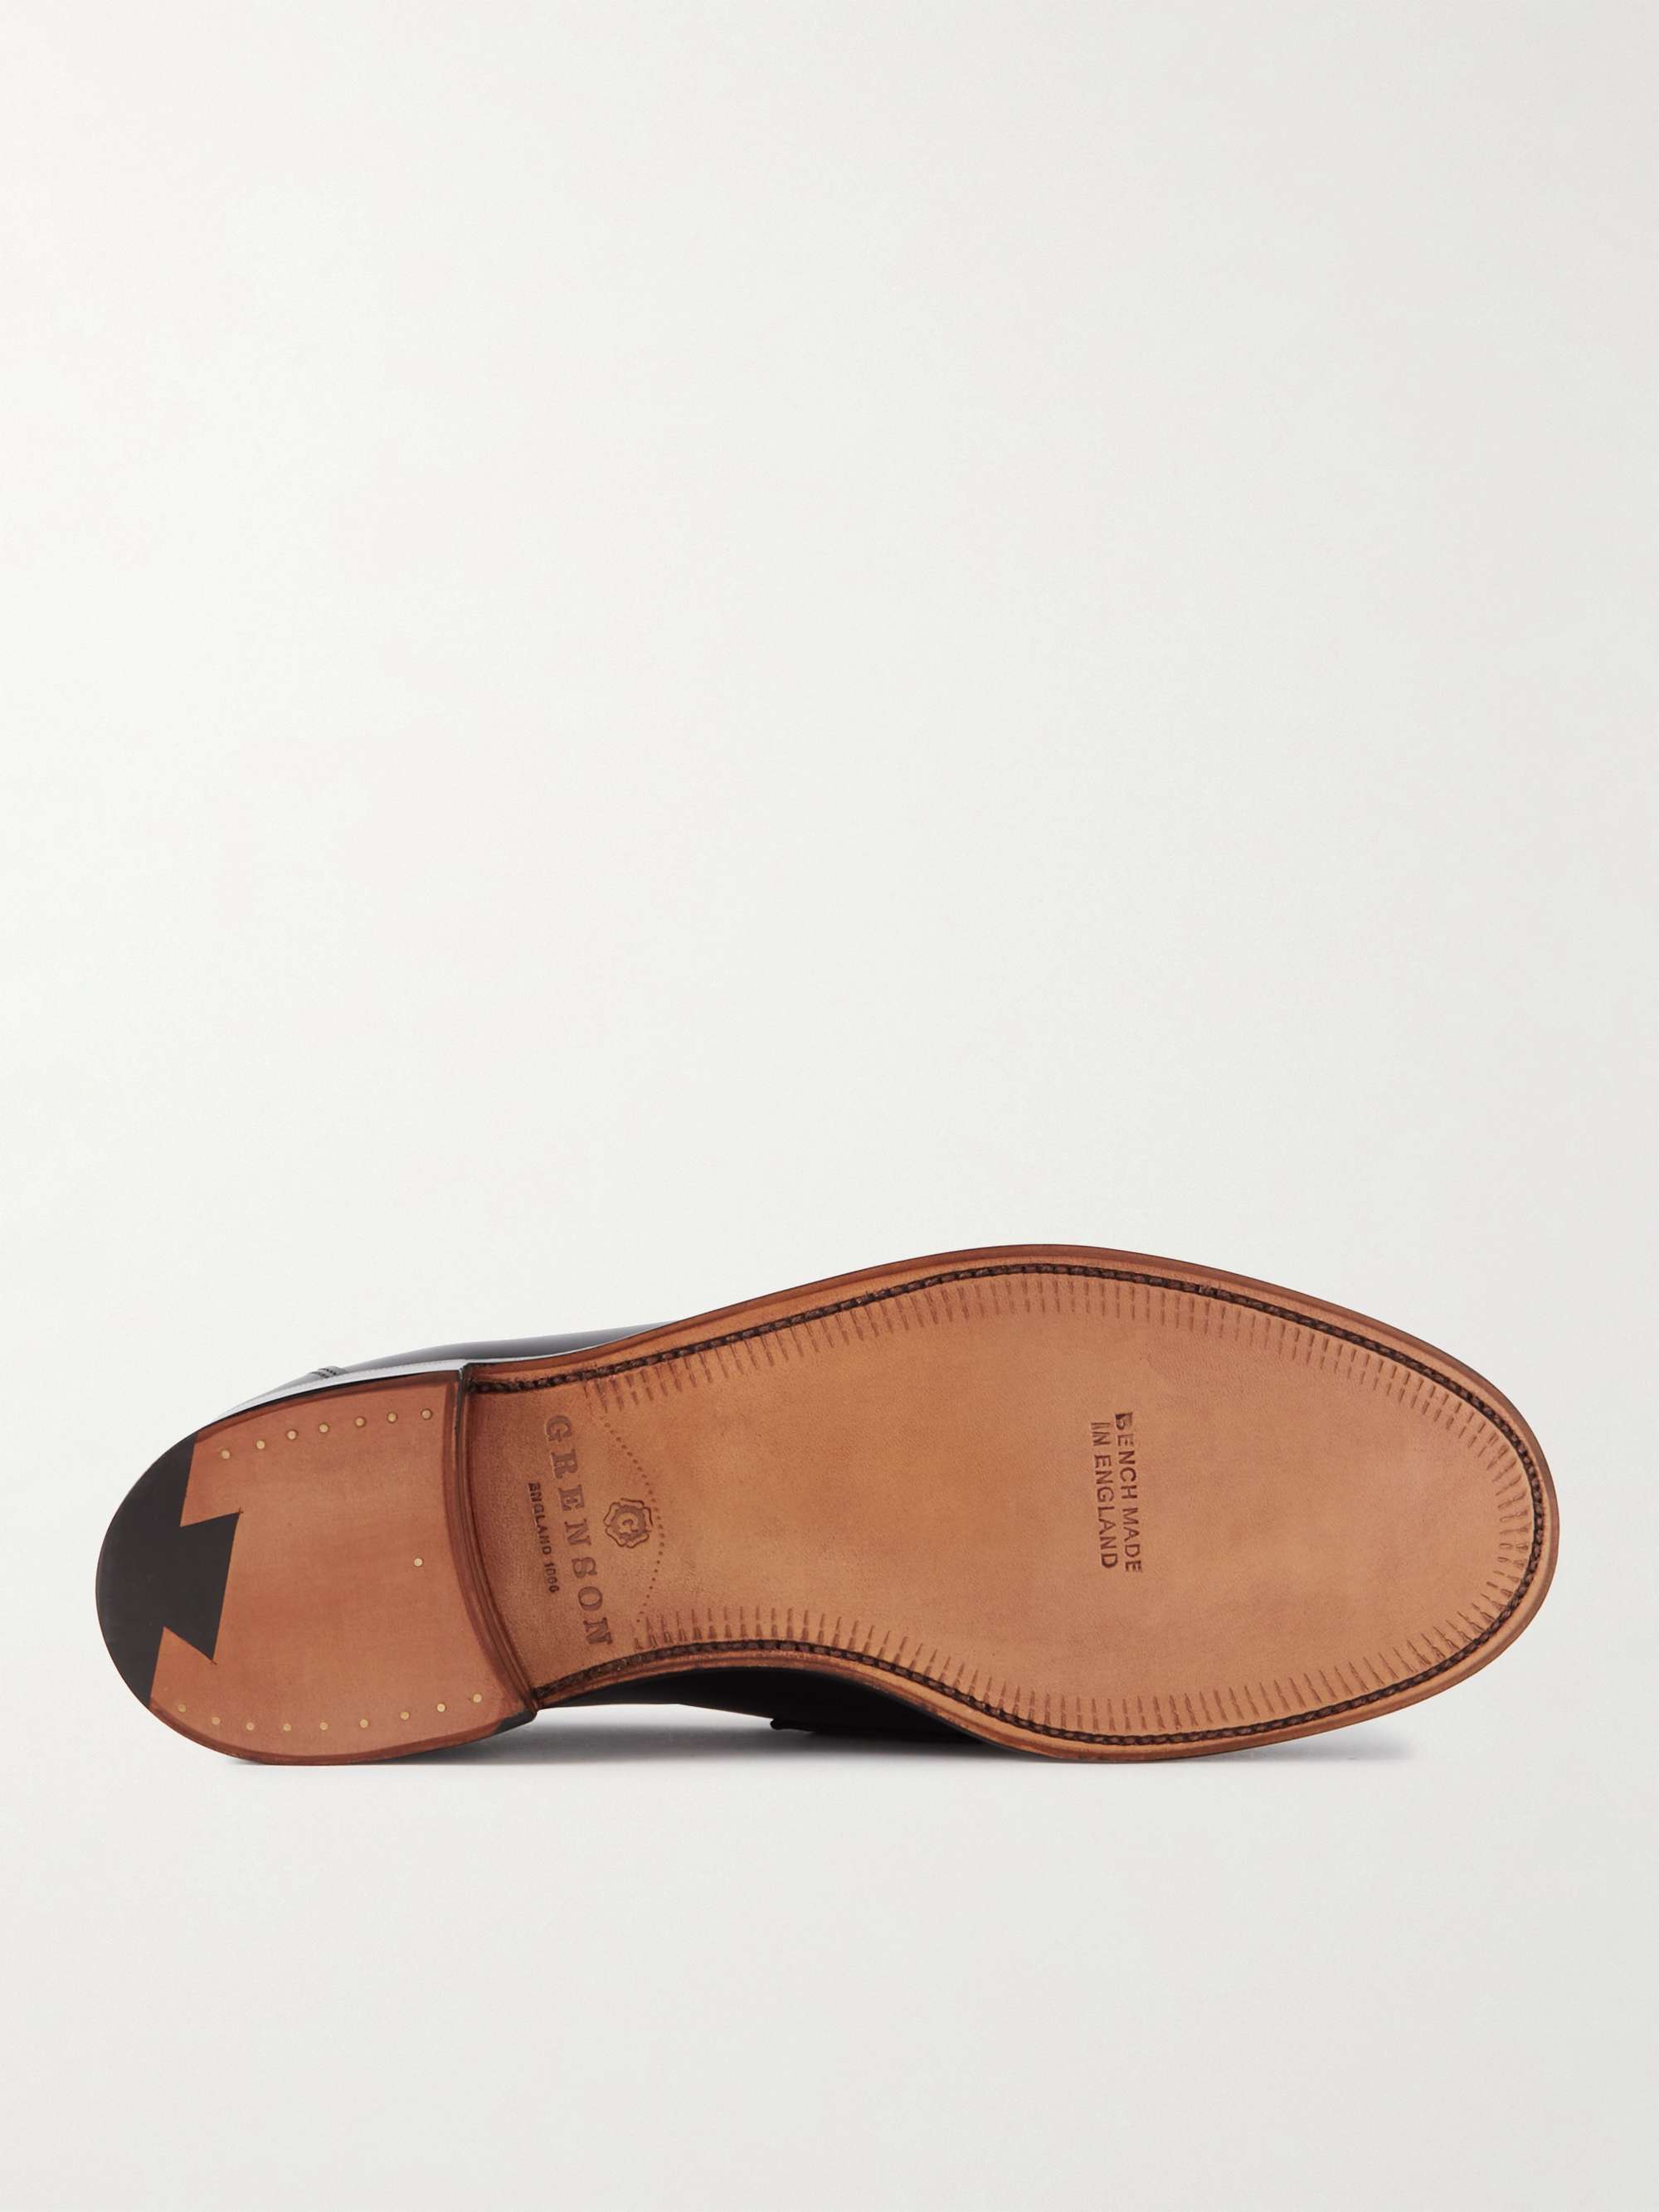 GRENSON Epsom Leather Penny Loafers